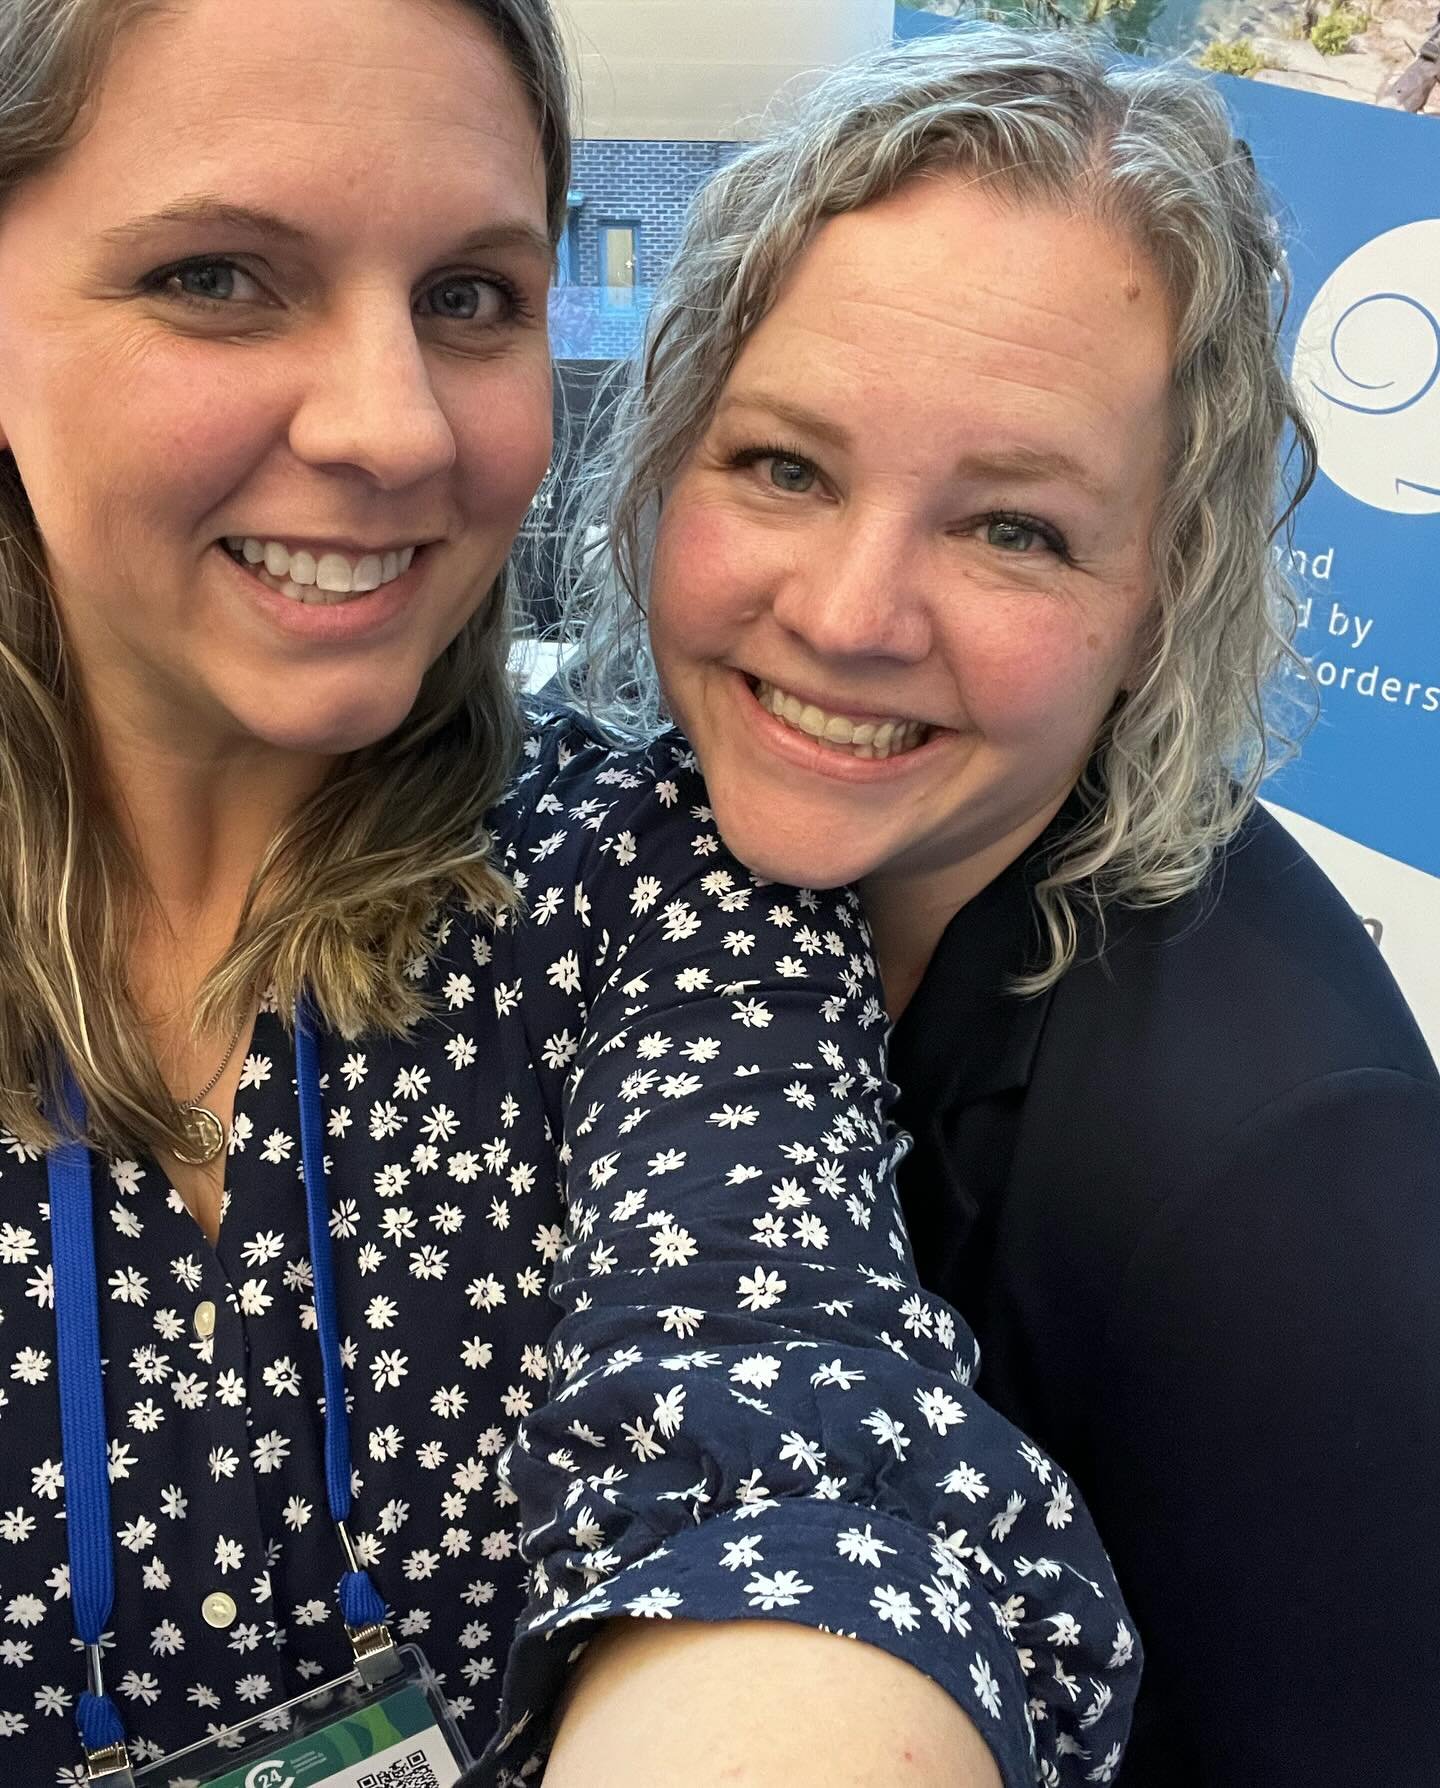 Devon and Nicole are conferencing it up at the Canadian Physiotherapy Association&rsquo;s 2024 Congress, learning about all the updates in the physio world!

#physio #physiotherapy #alwayslearning

@physiotherapycanada